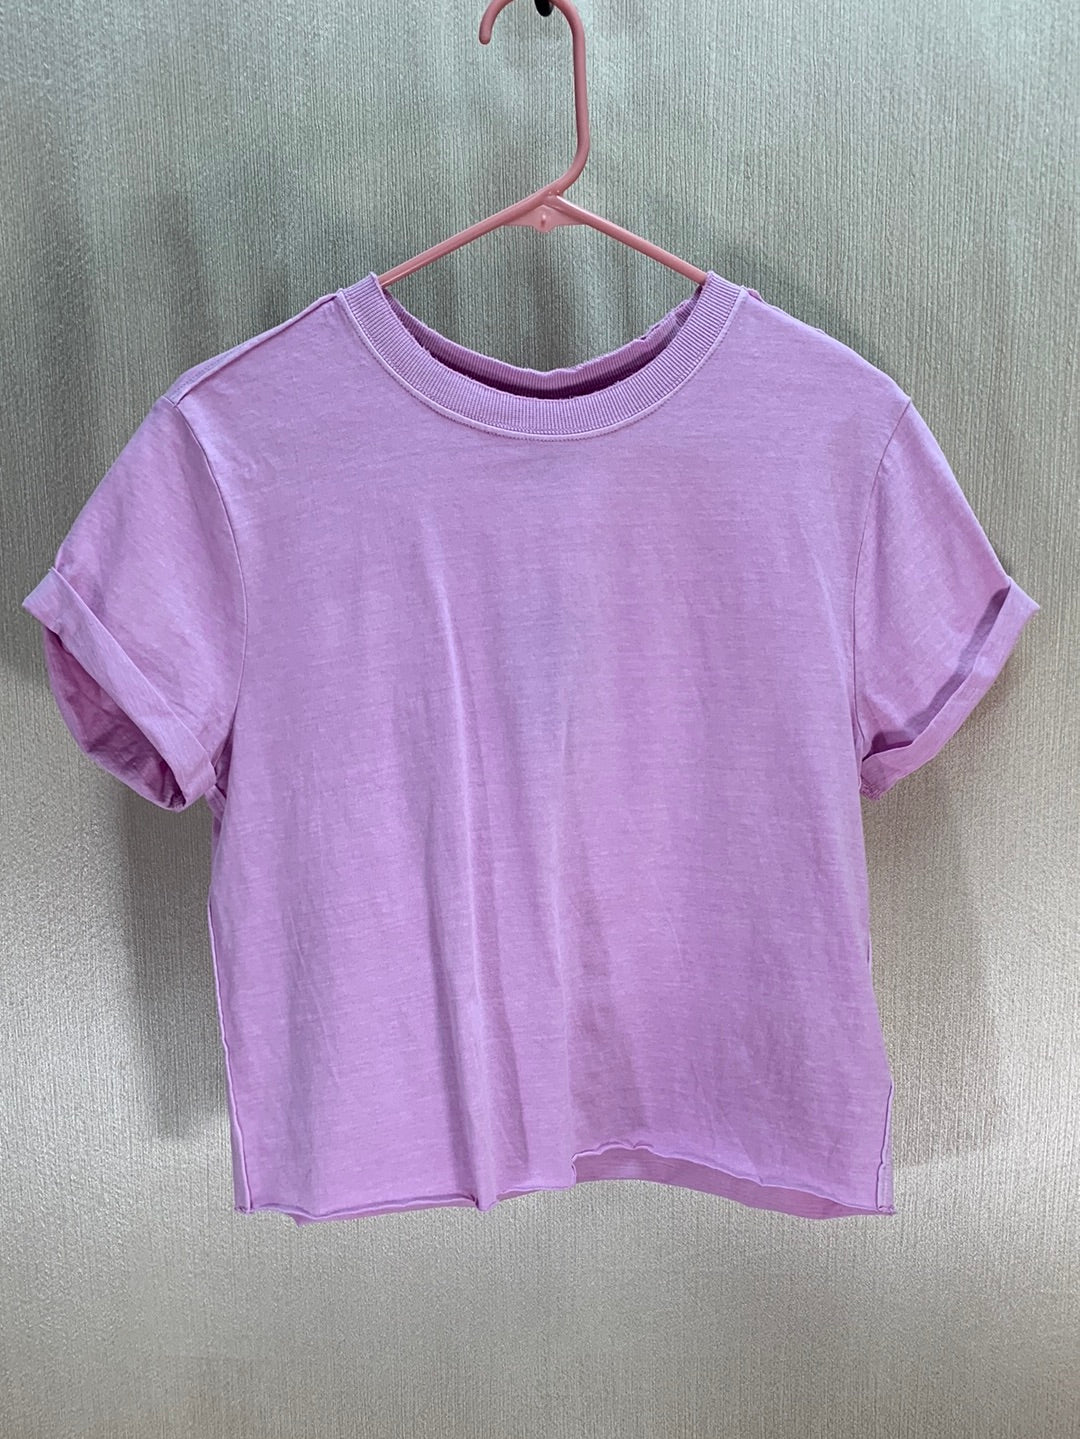 NWT - WILD FABLE lavender Cropped Short Sleeve Crew Neck T-Shirt Top - S